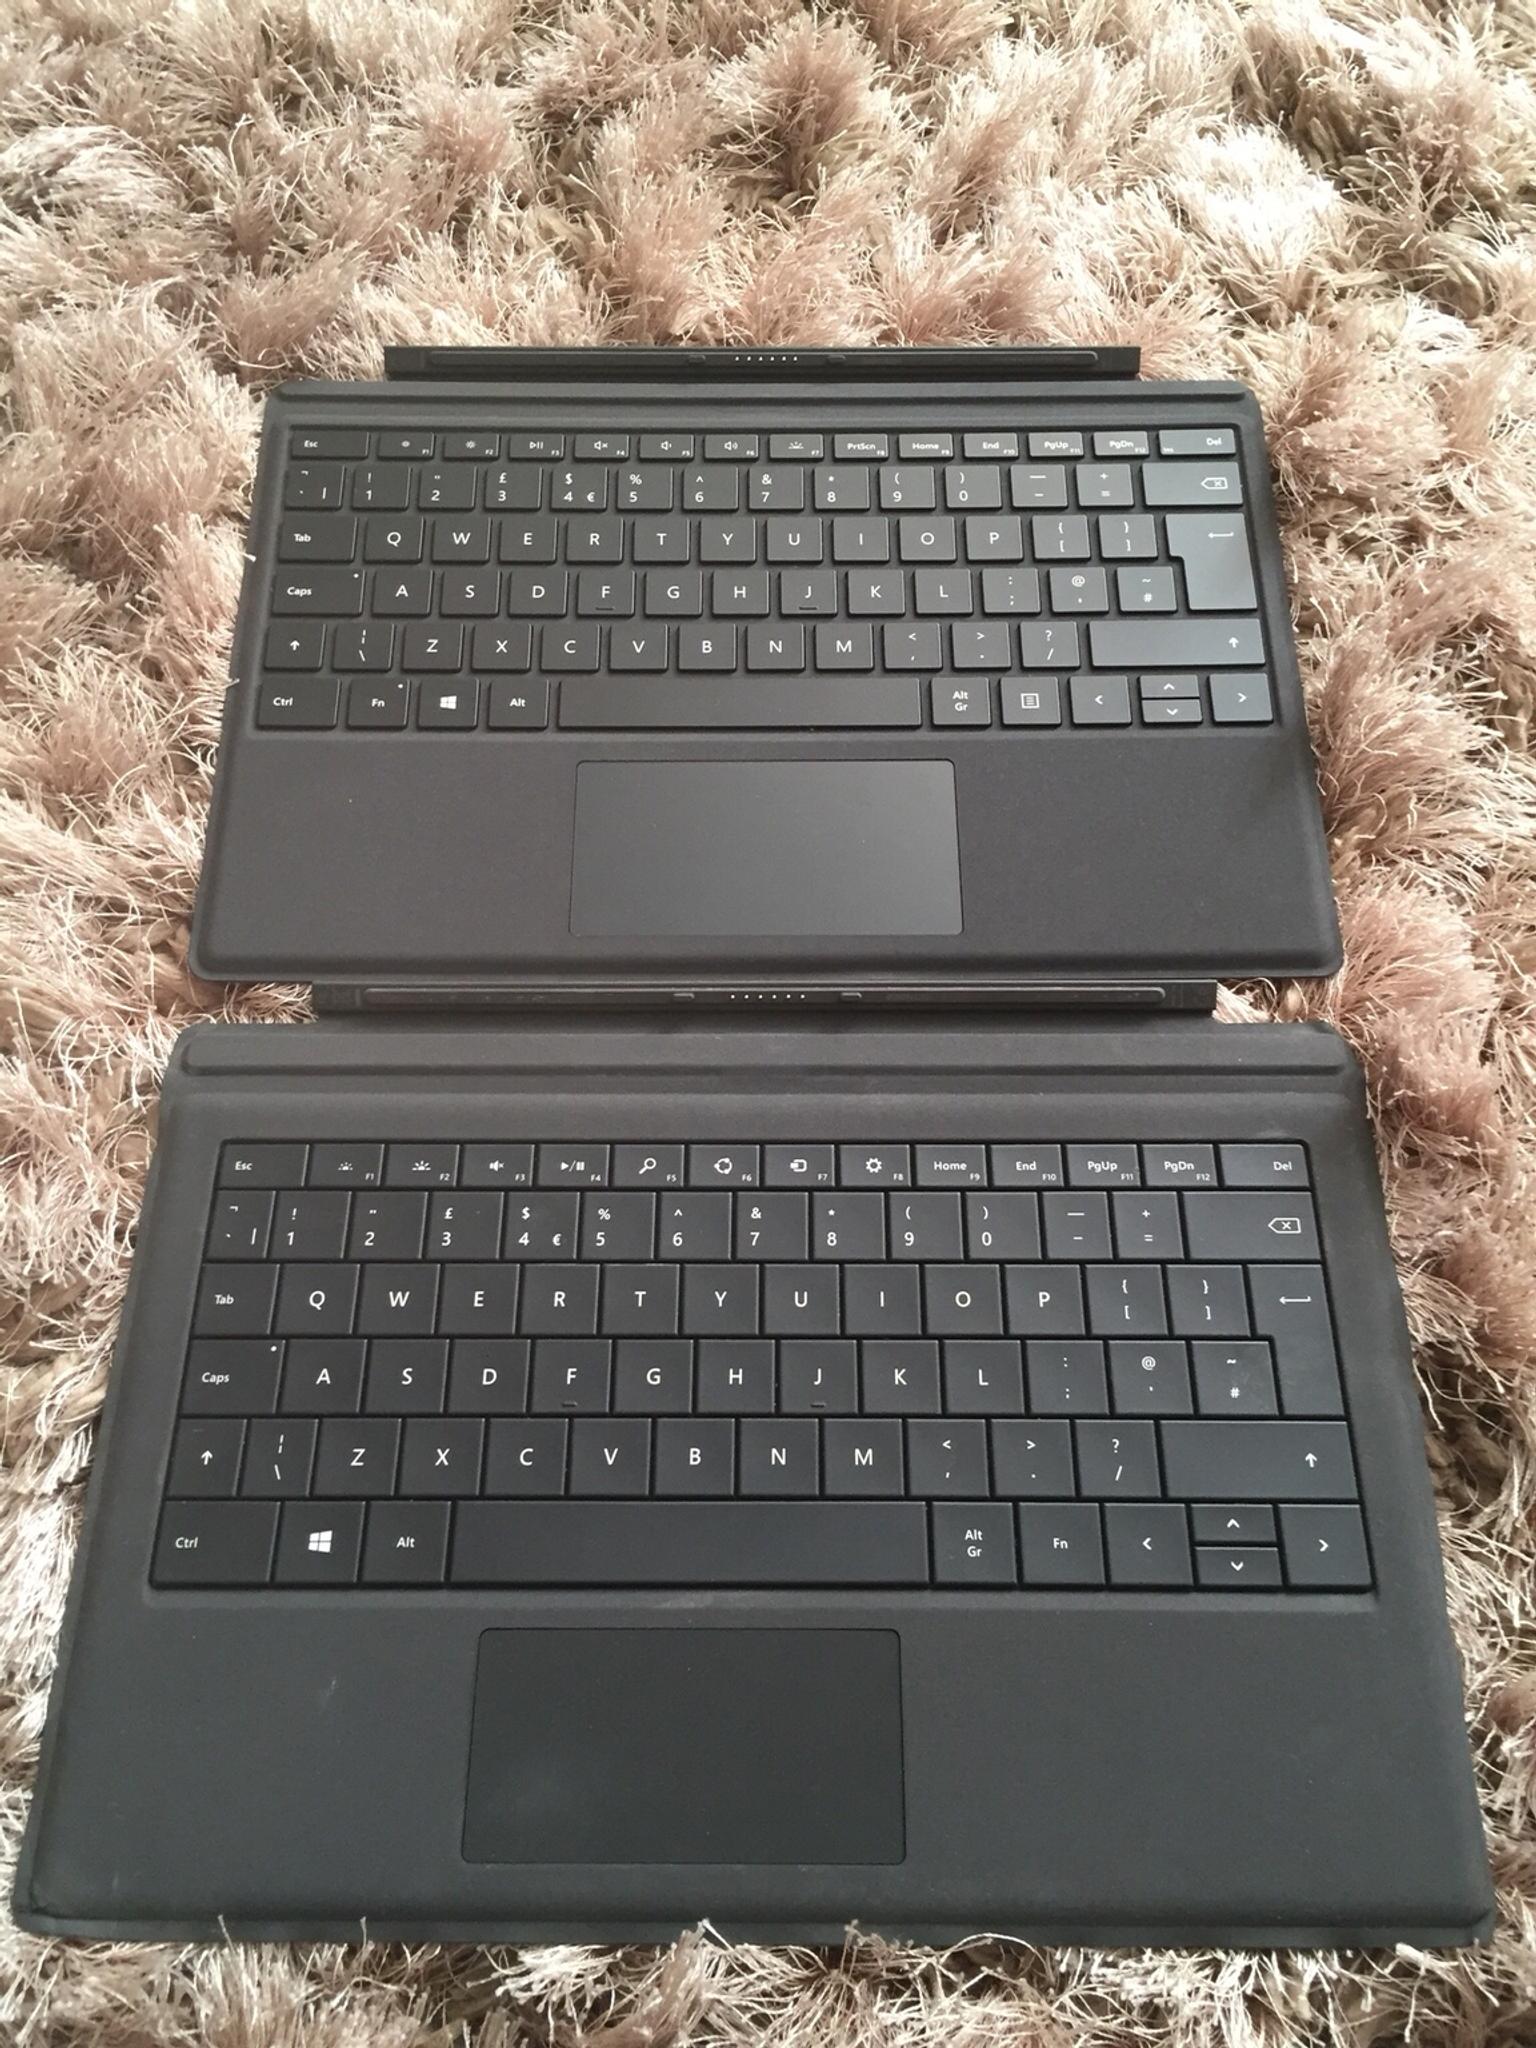 Microsoft Surface Pro 4 Keyboards In Ls10 Leeds For 60 00 For